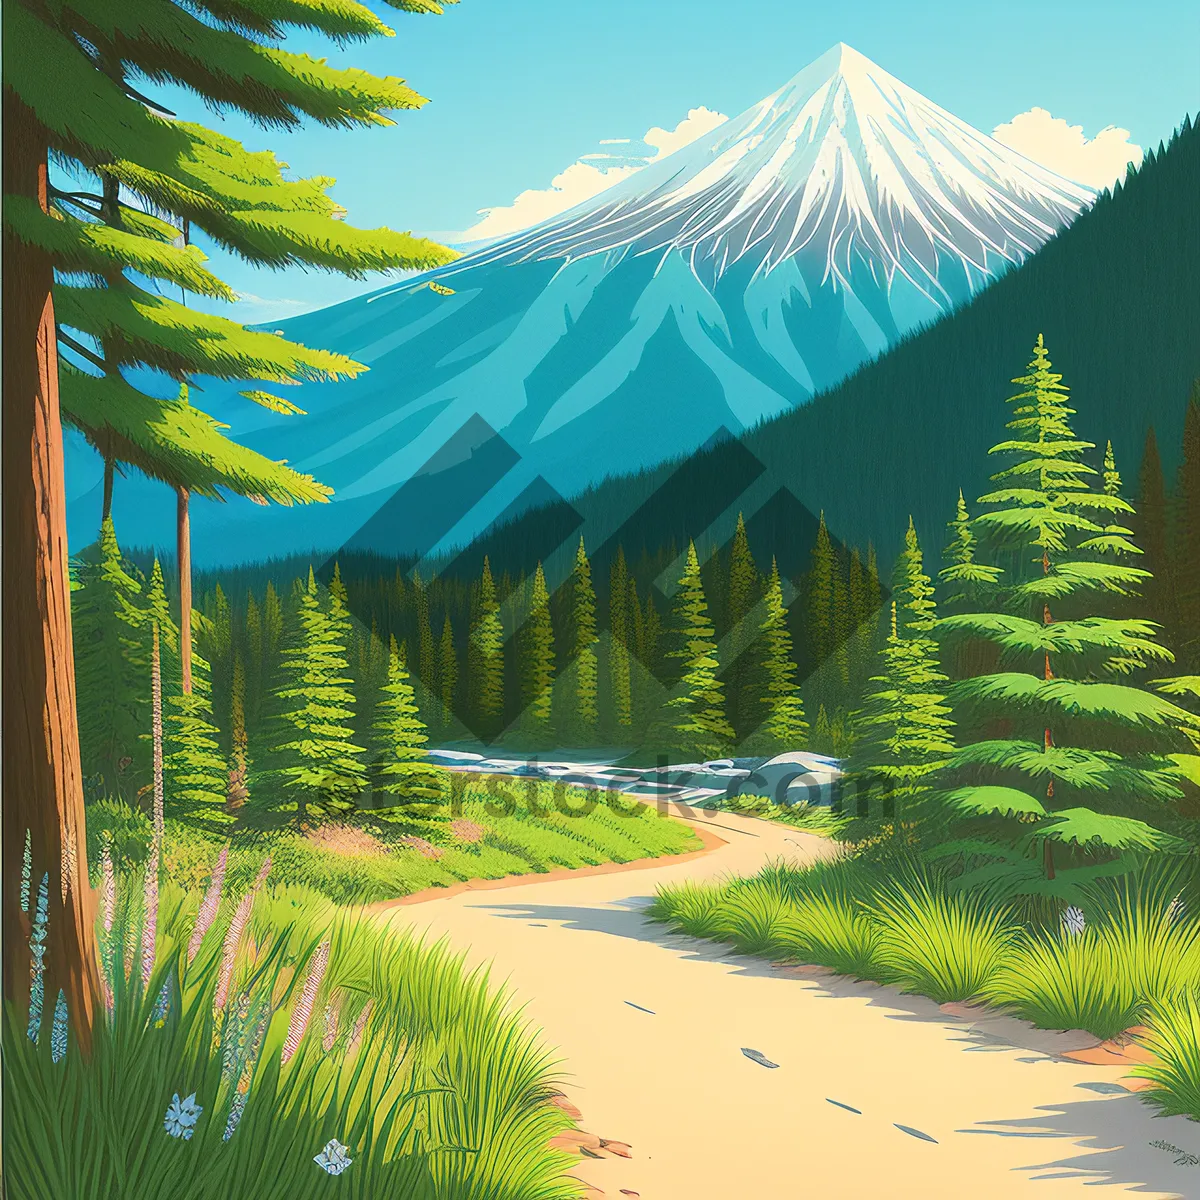 Picture of Serene Evergreen Forest Amidst Lush Summer Landscape